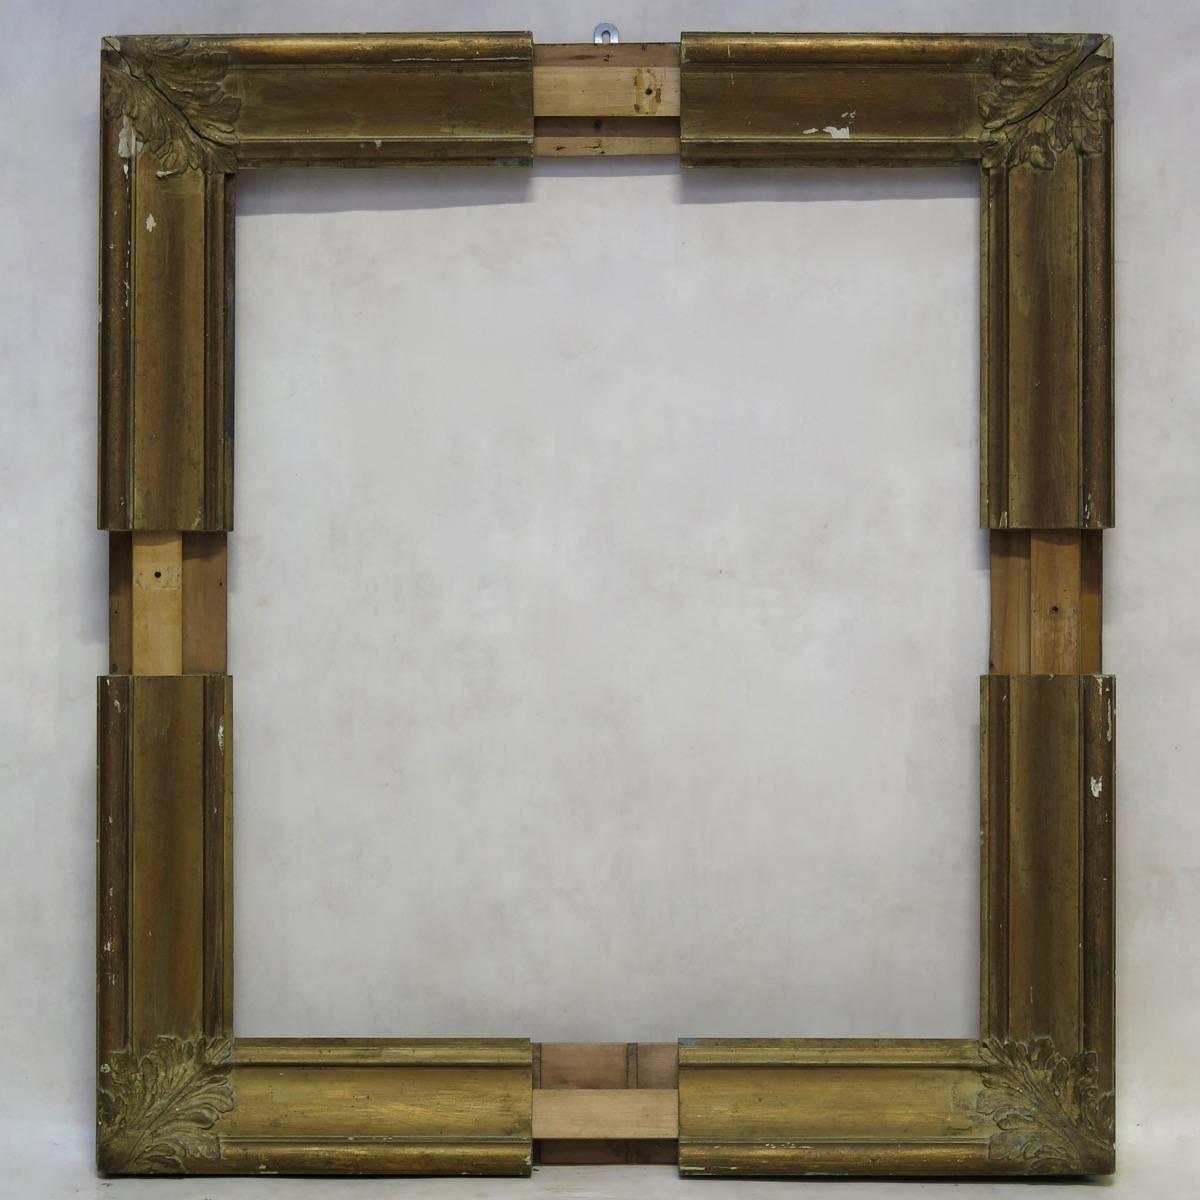 Very rare and unusual pair of giltwood picture frames that are adjustable in width and height, decorated with large acanthus leaves in each corner. One small and one large.

Dimensions provided below ("fully-deployed") are for the larger